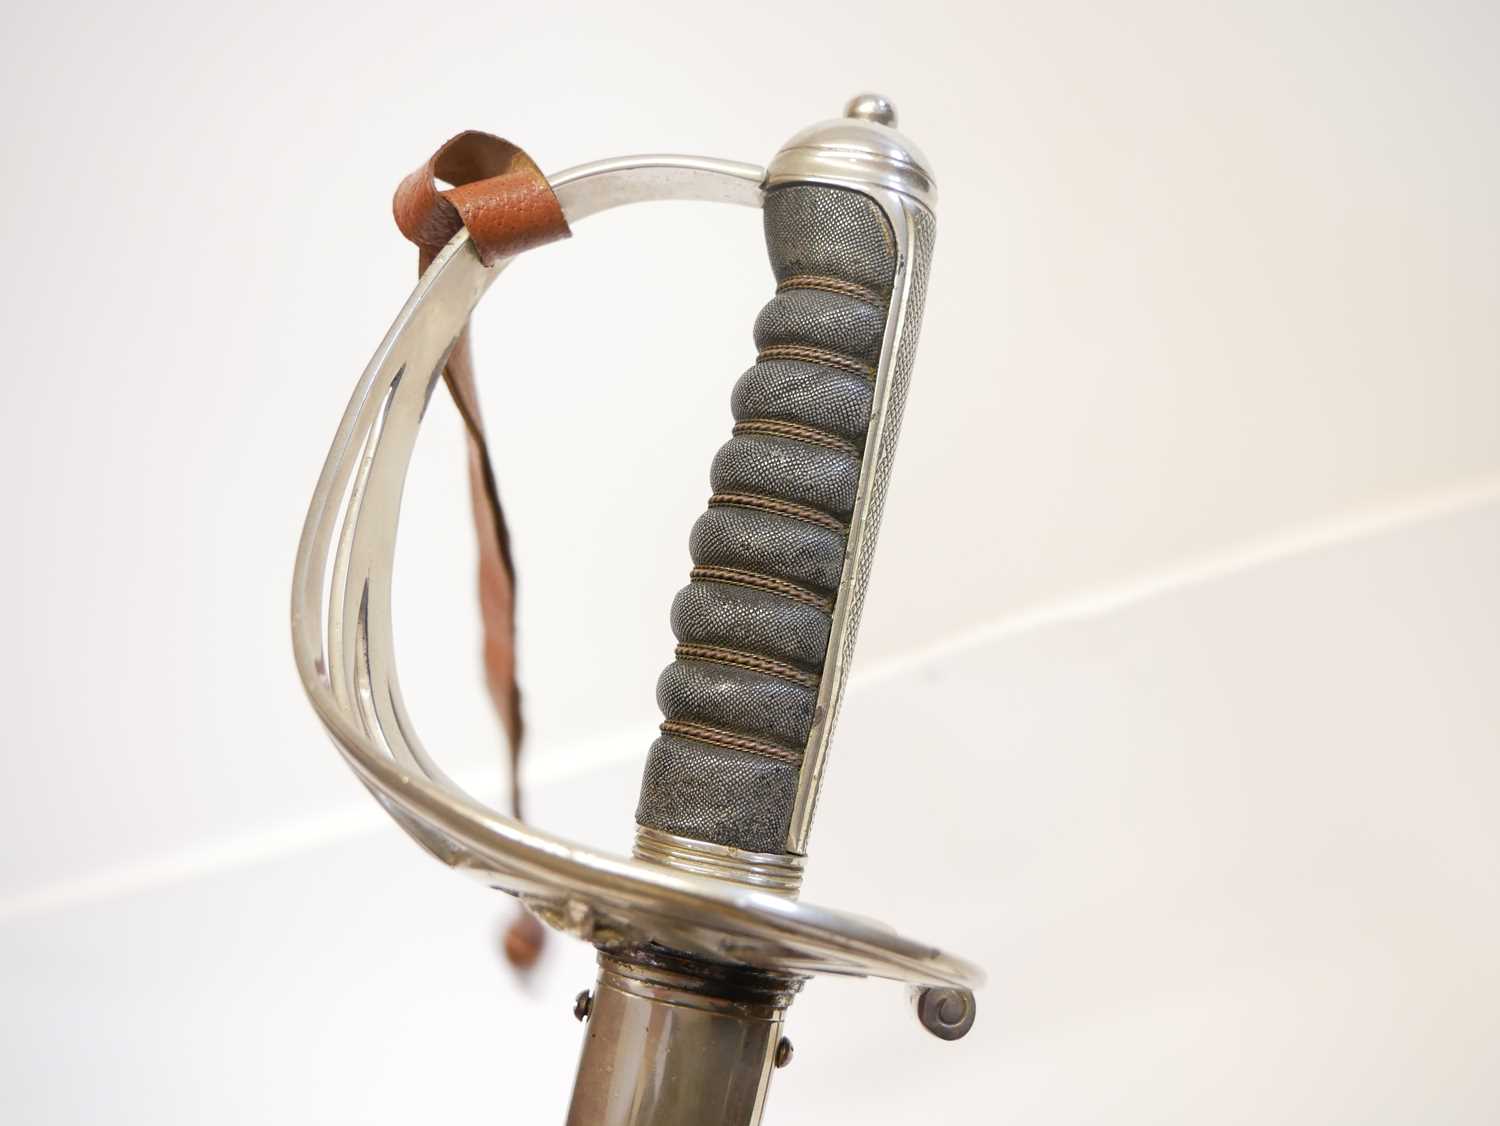 1827 pattern Rifle Officers sword and scabbard, retailed by Moss Brothers with 20-21 King Street, - Image 12 of 15